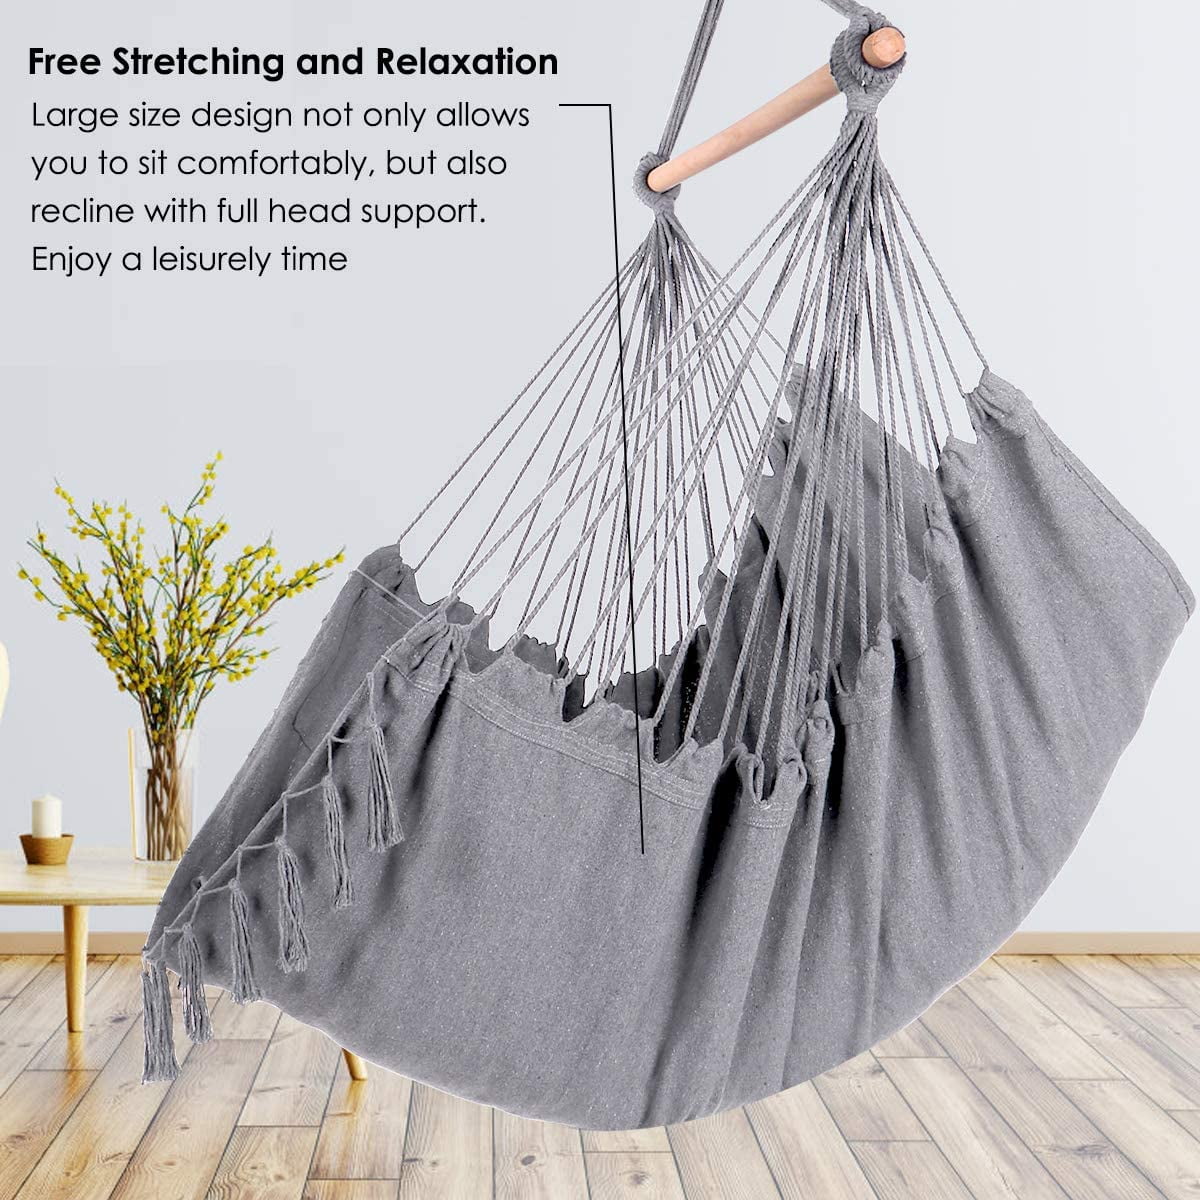 Max 330 Lbs Quality Cotton Weave for Superior Comfort,Durability Red Stripe Y- STOP Hammock Chair Hanging Rope Swing